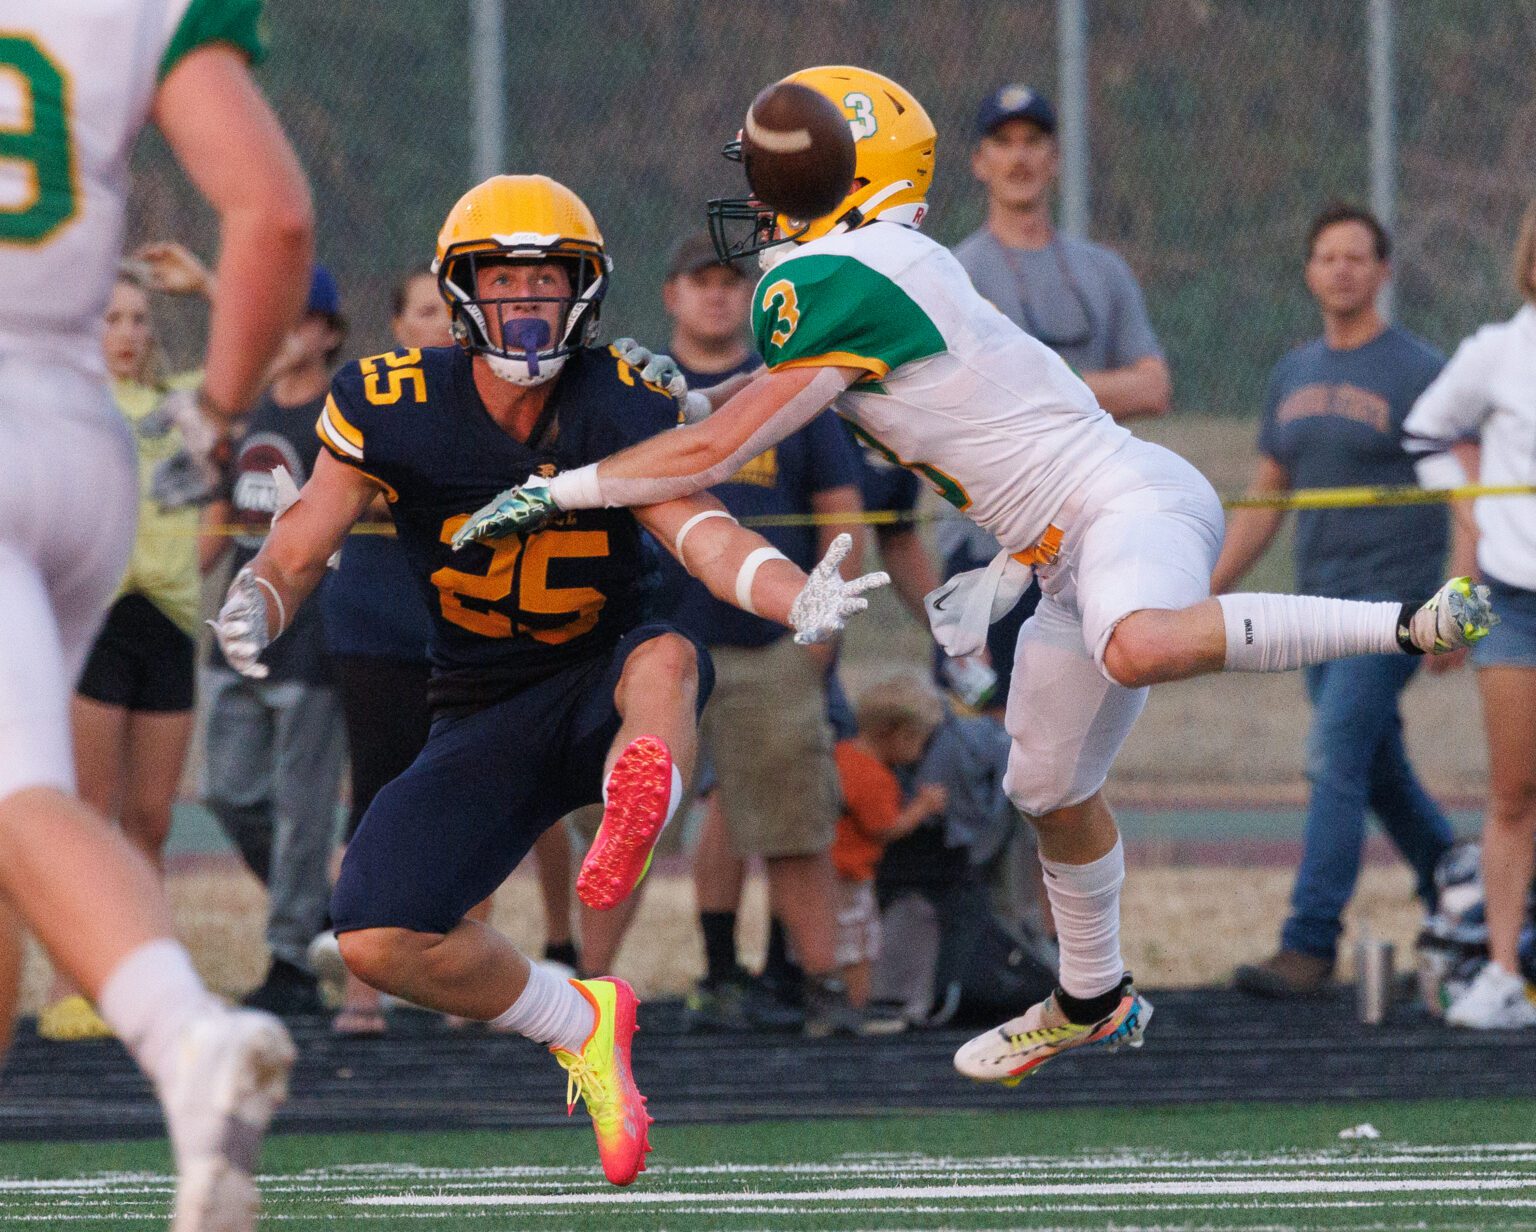 Lynden’s Kaeden Hermanutz breaks up a pass intended for Ferndale's Conner Walcker but is called for defensive pass interference on the play. The Lions beat Ferndale 24-7 at Blaine High School on Friday night.